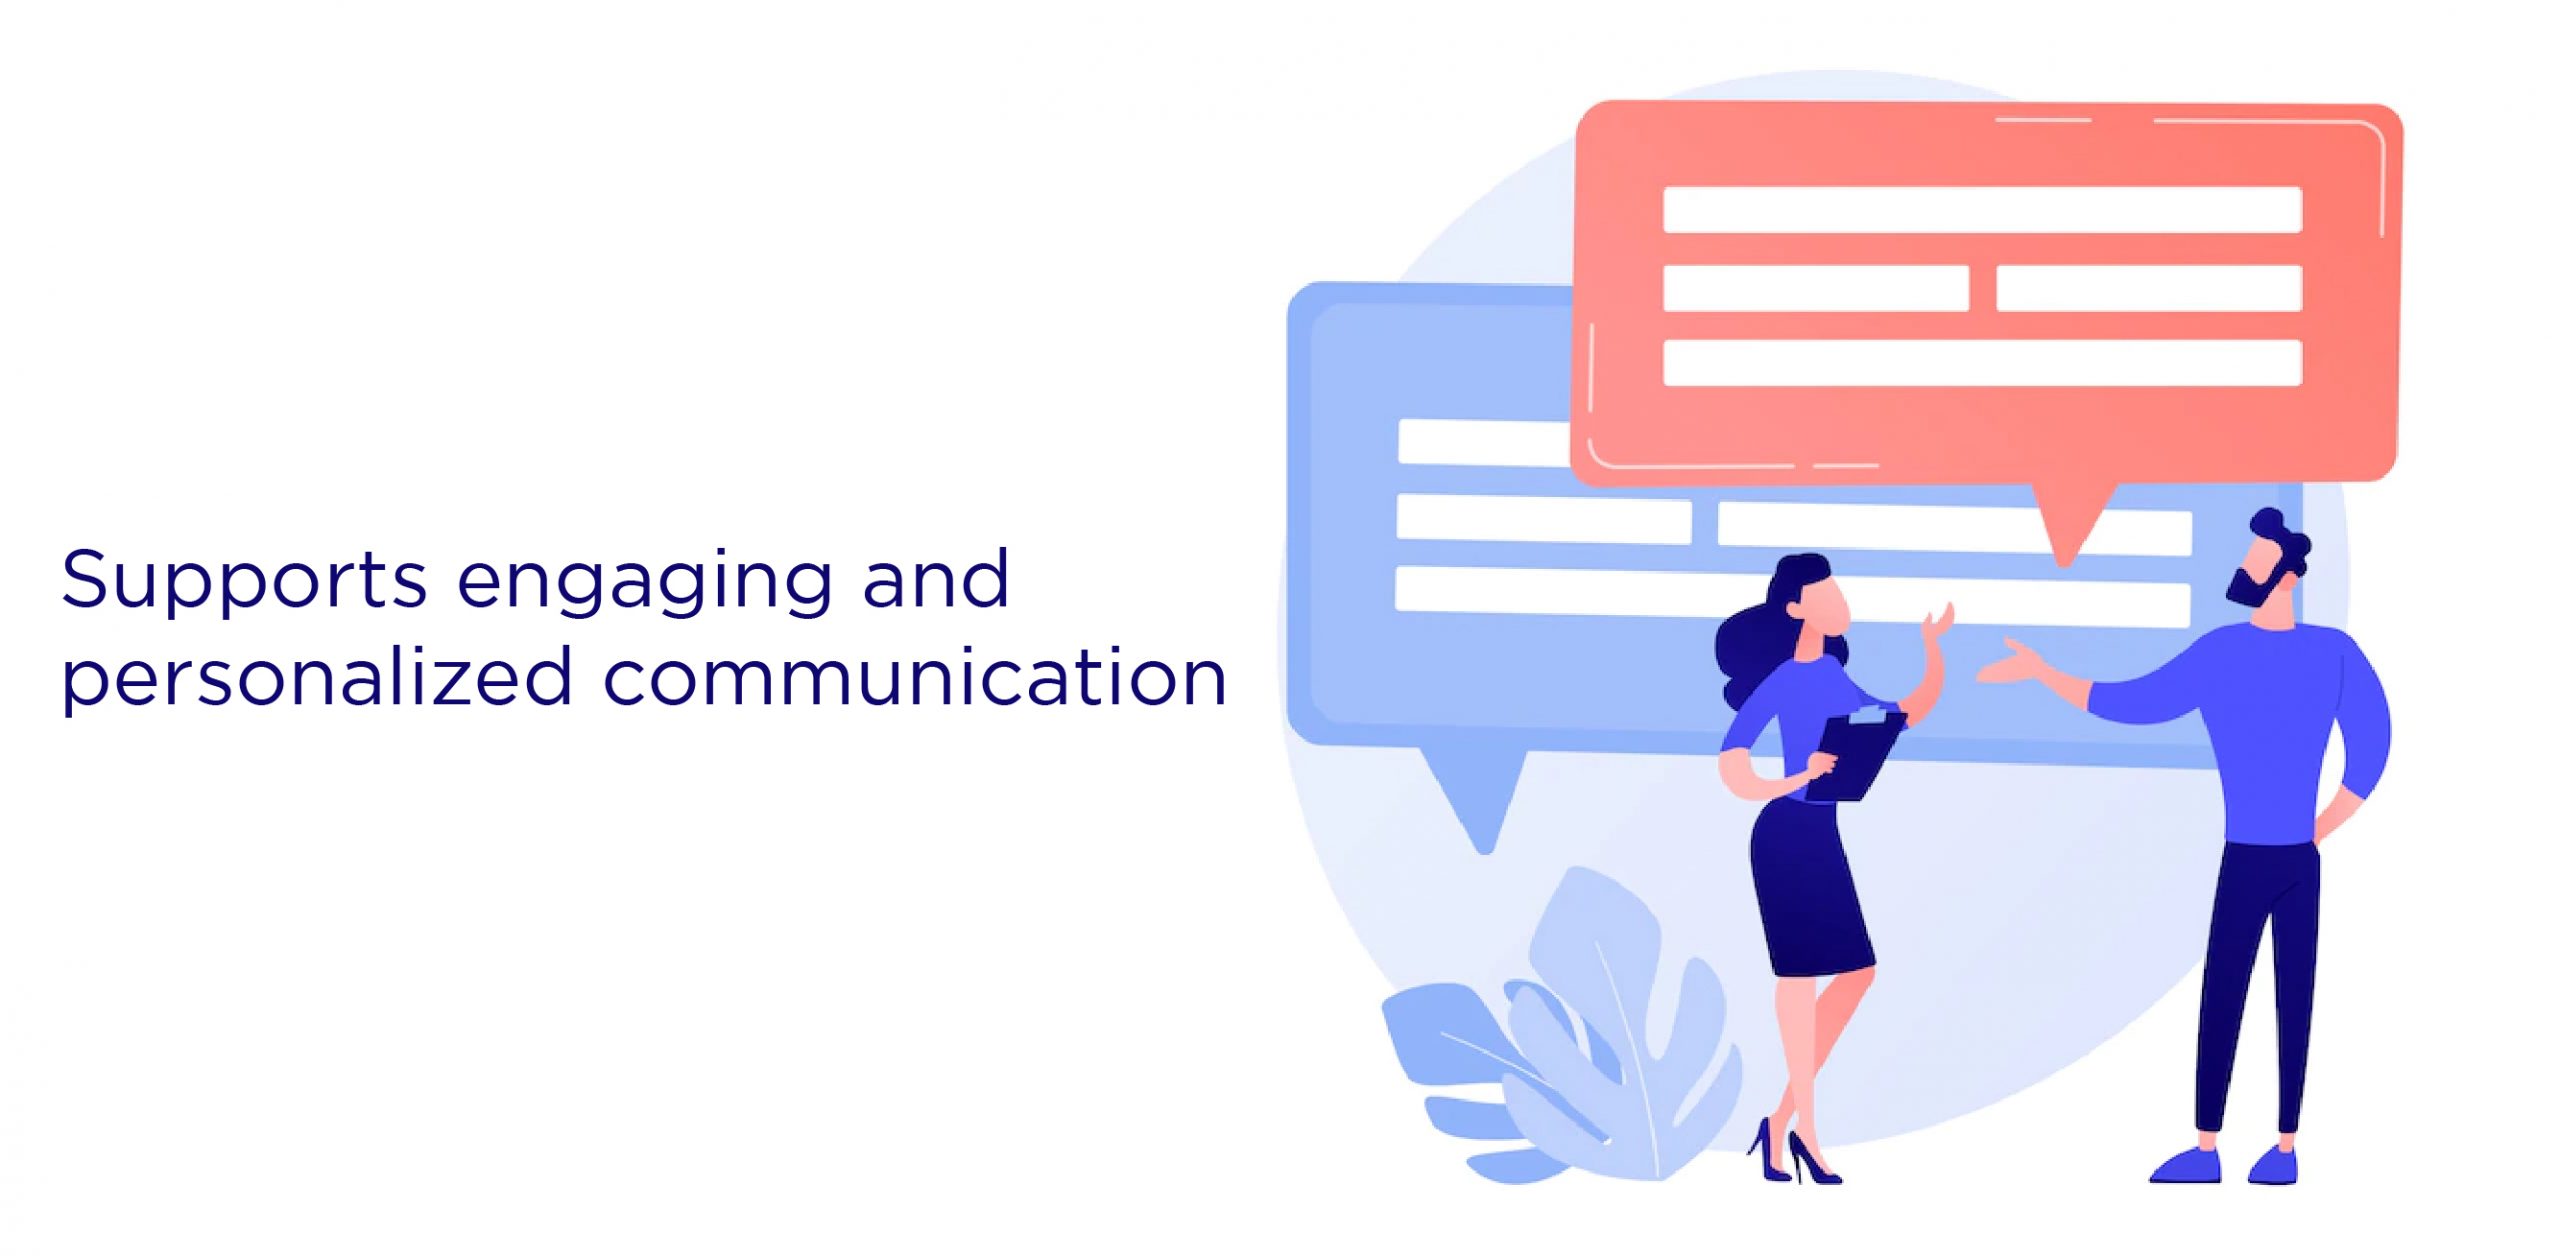 Supports engaging and personalized communication